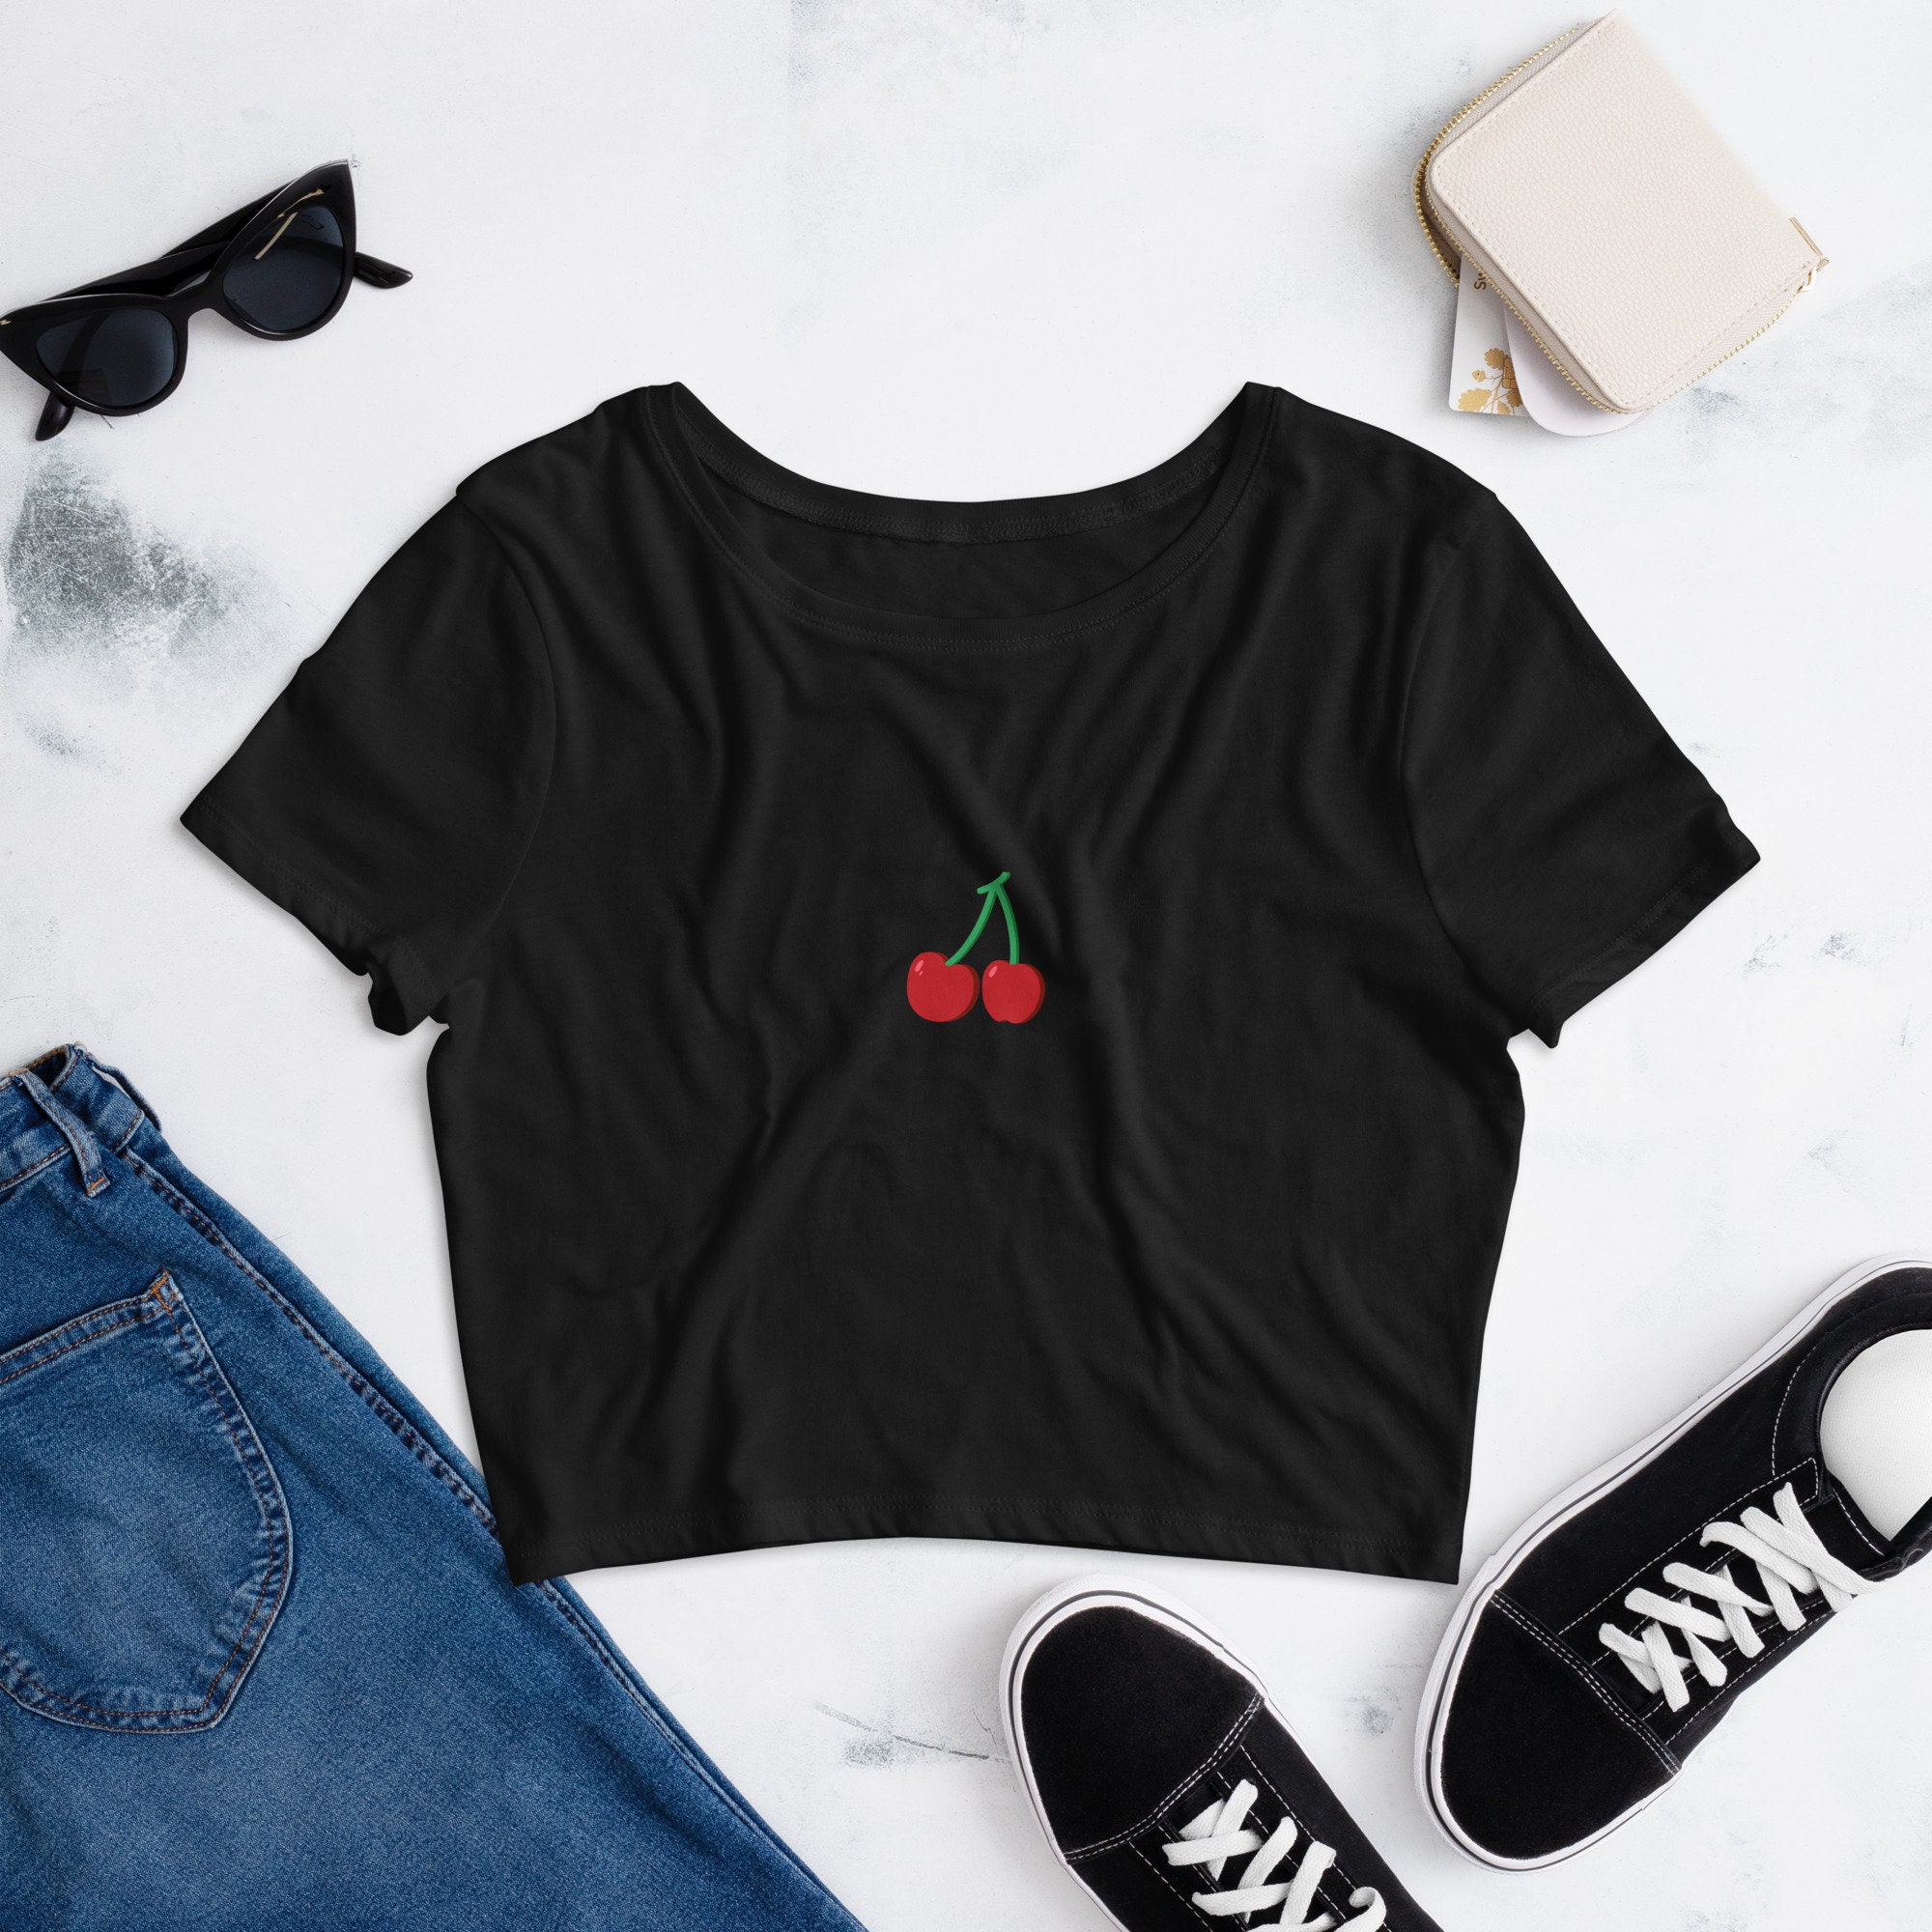 With Cherries on Top Coquette Baby Tee, Cherries With Bows Graphic